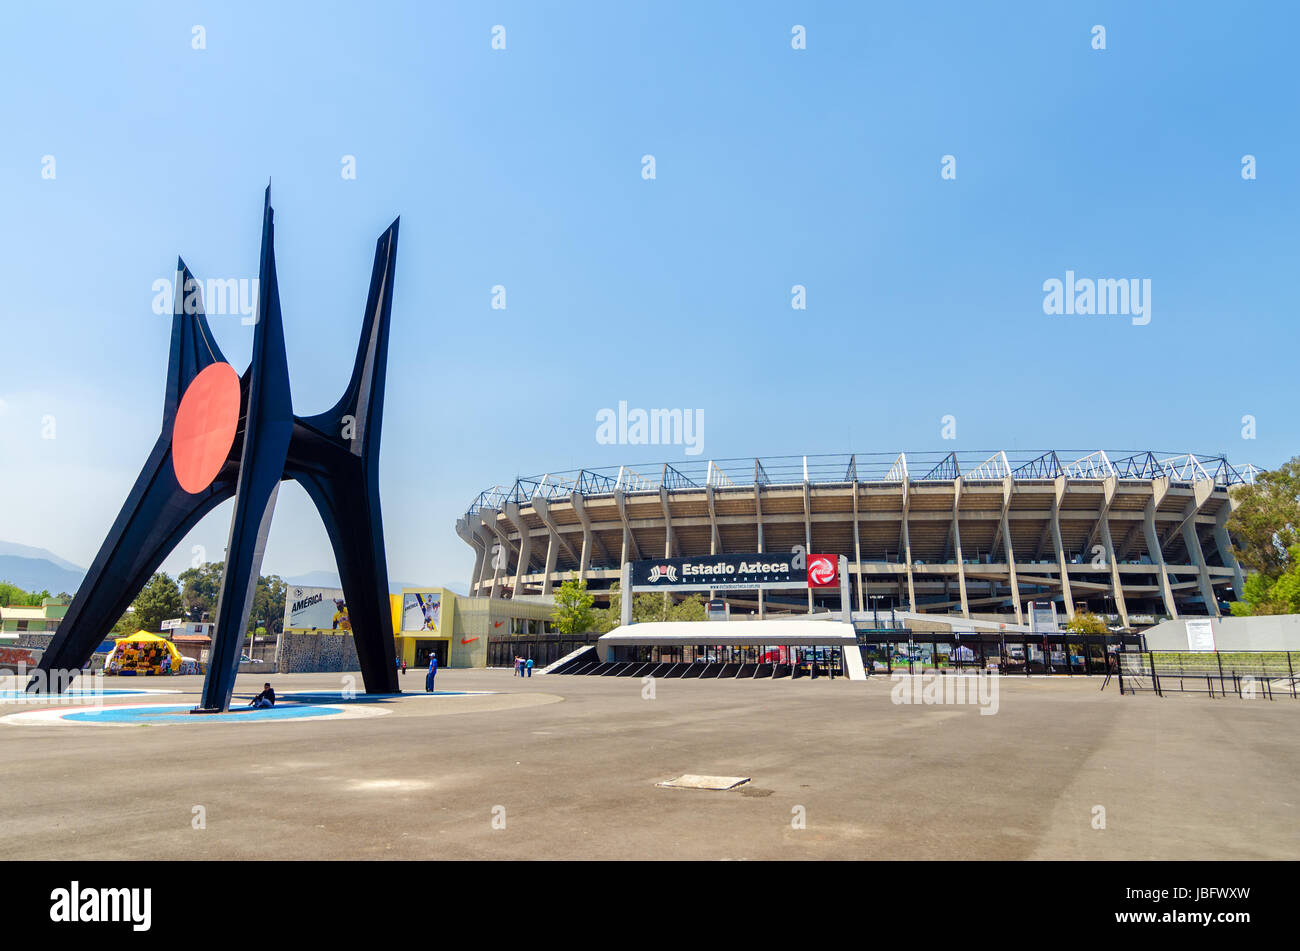 MEXICO CITY - MARCH 24:  Exterior of Azteca Stadium in Mexico City on March 24, 2013.  Azteca Stadium is the home of the Mexican National soccer team Stock Photo